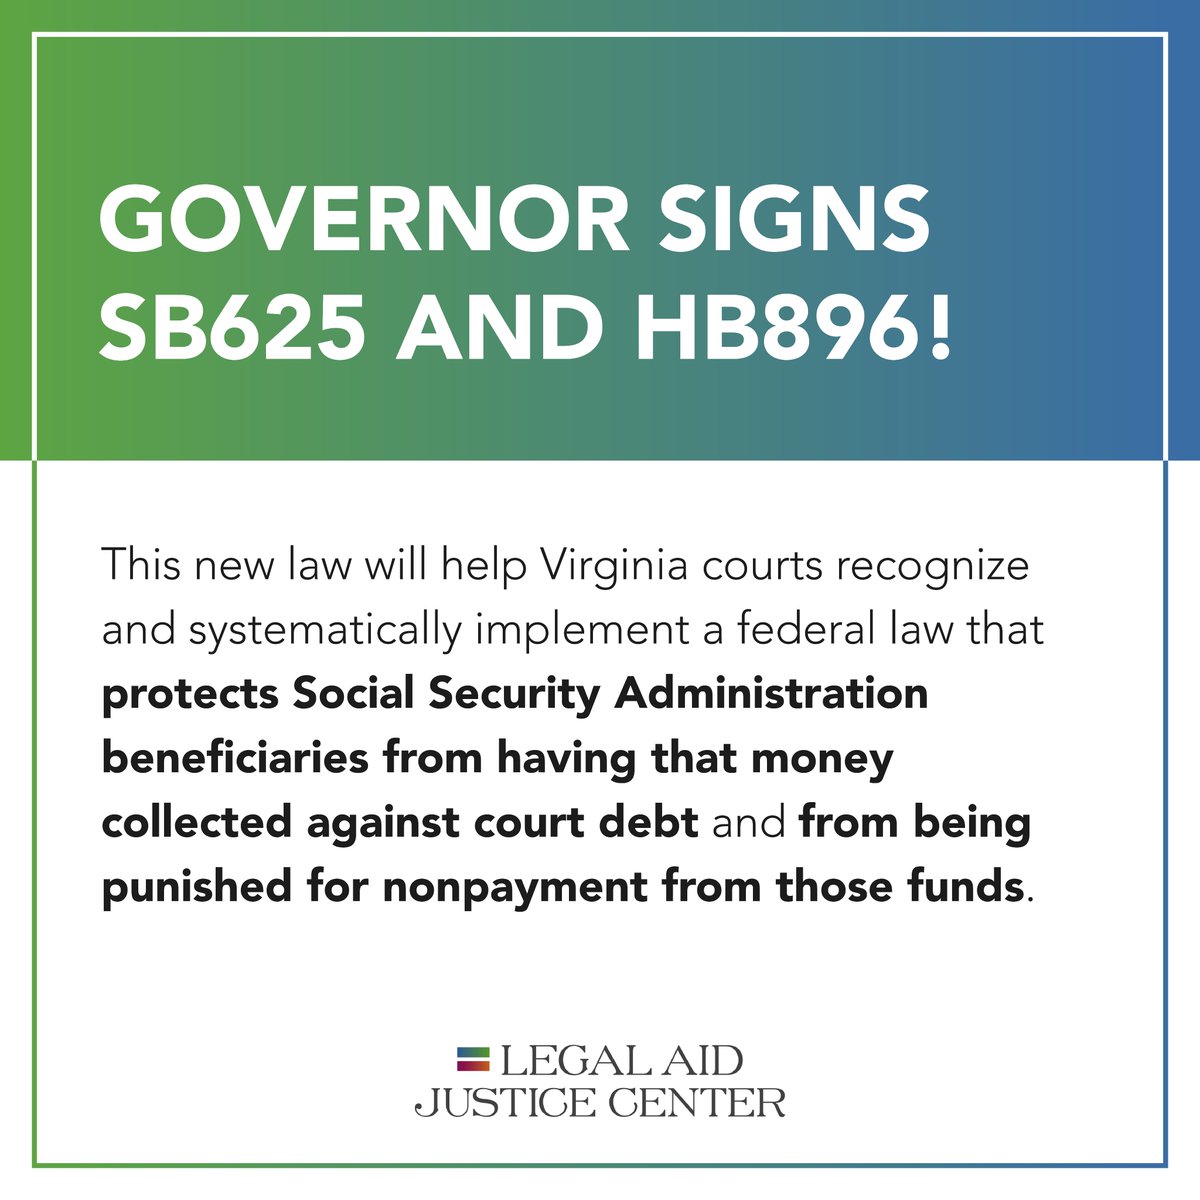 This week, Gov. Youngkin signed #SB625 and #HB896! Thousands of Virginians survive on SSA benefits, and this new law will help these Virginians and their families stay afloat. We want to thank everyone who worked on making this happen!